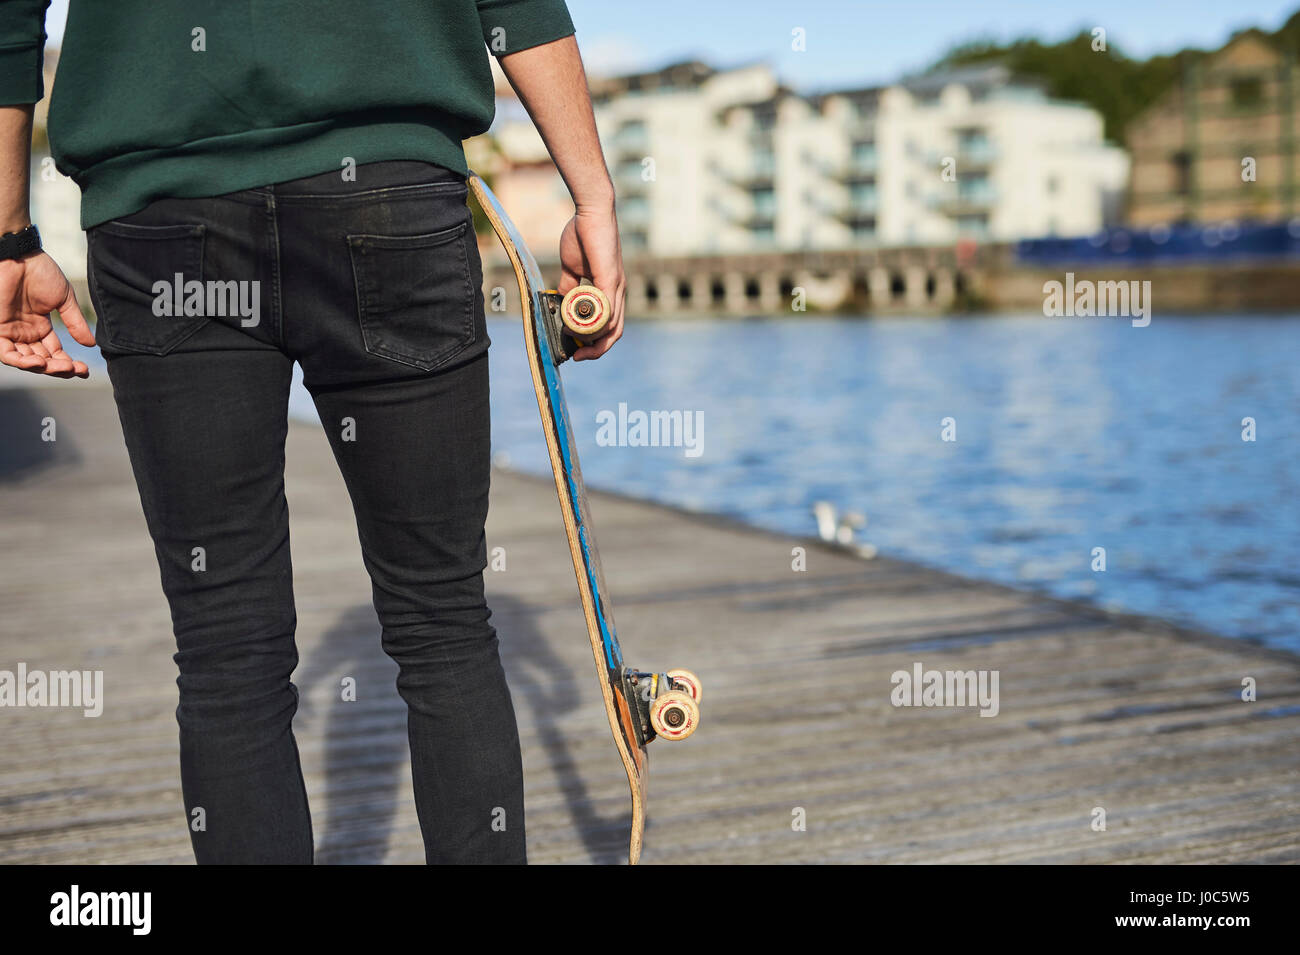 Young man walking beside river, holding skateboard, rear view, mid section, Bristol, UK Stock Photo